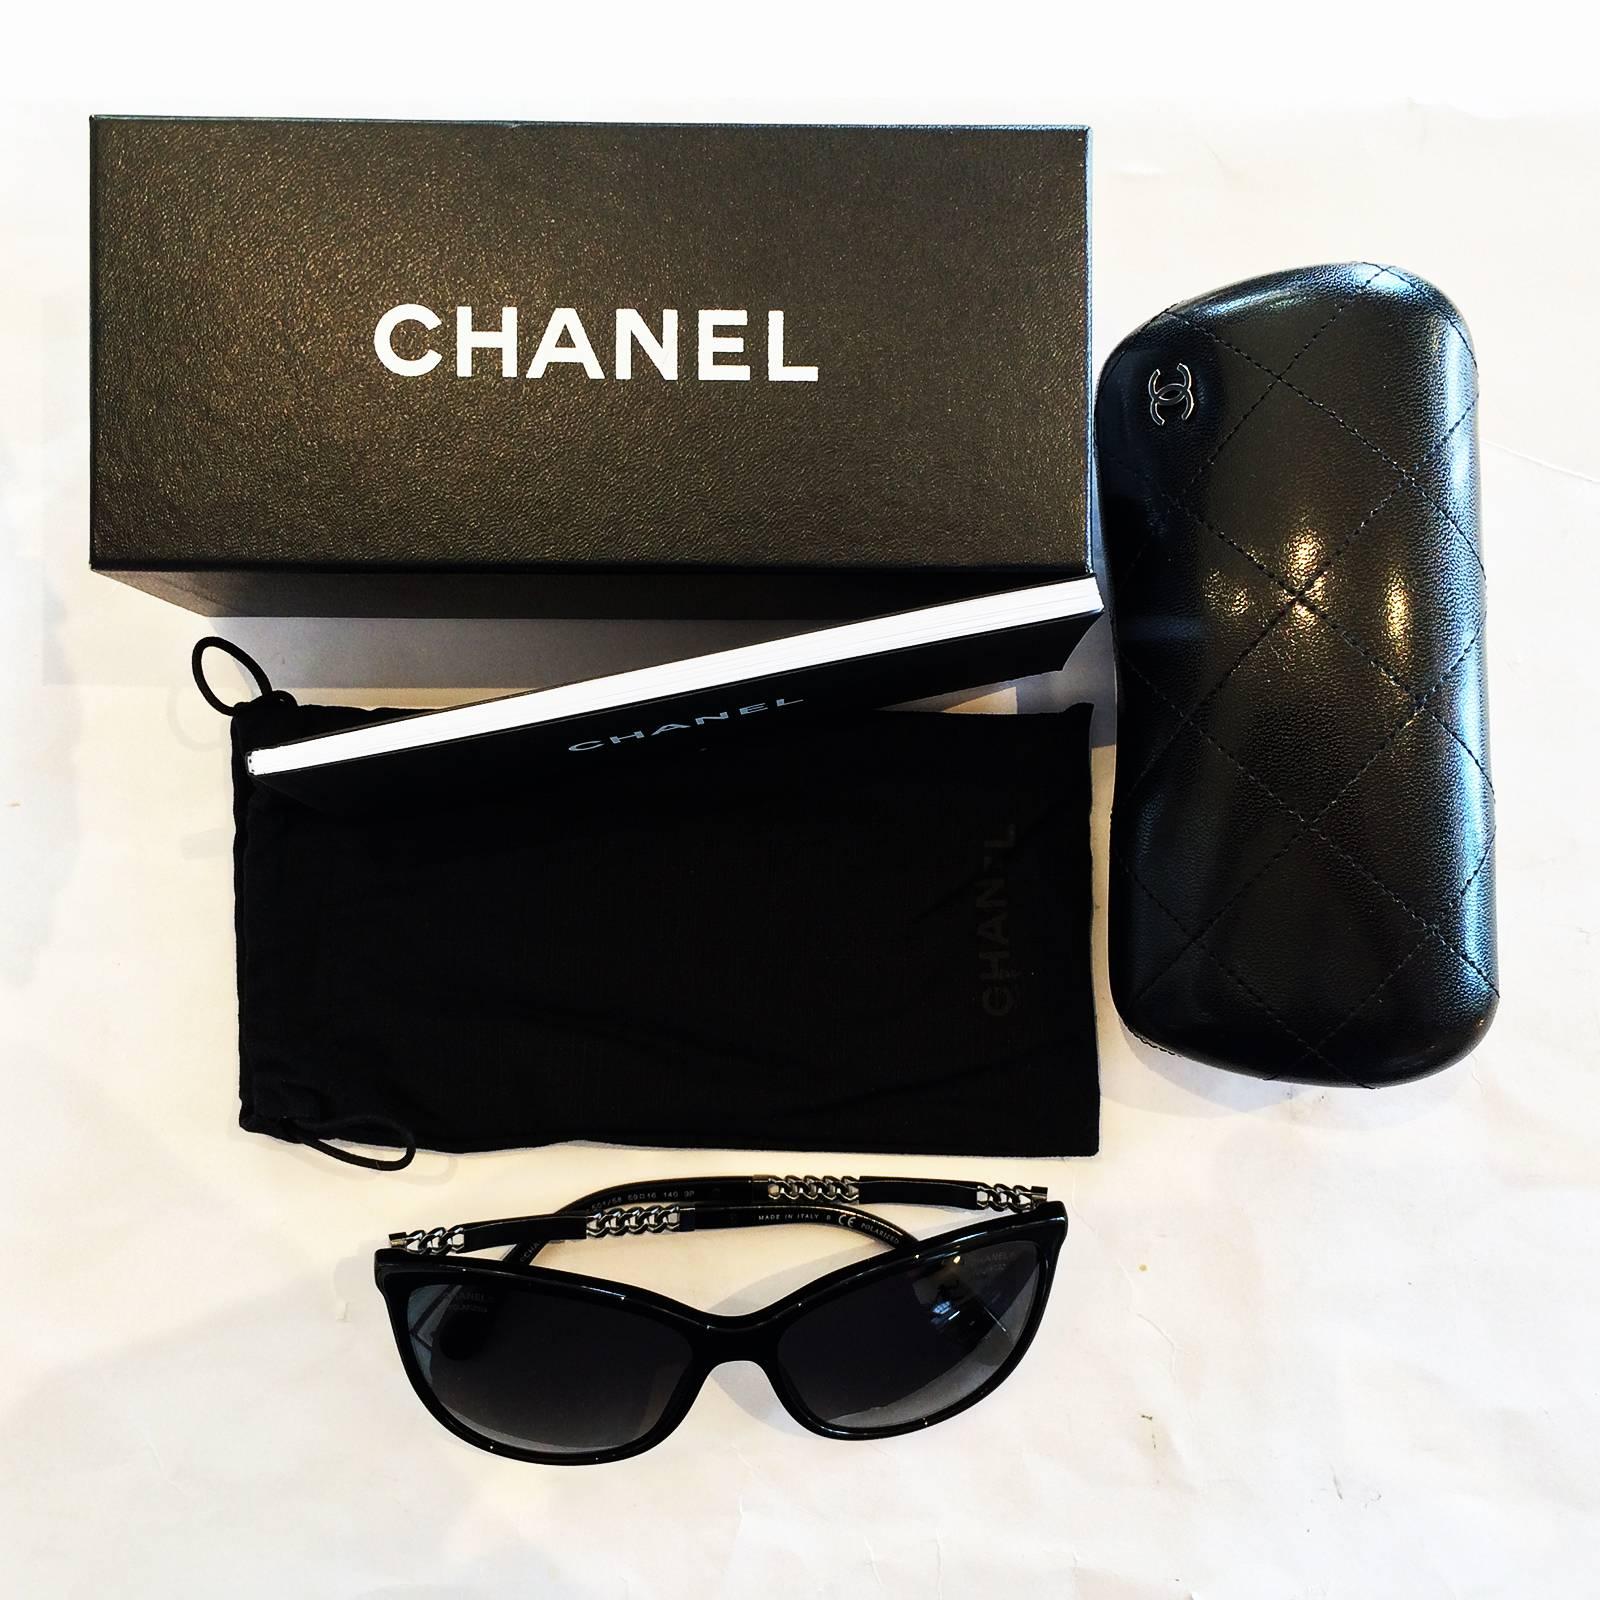 Authentic Chanel Black and Titanium Polarised Sunglasses, Model no  5352 c 501/S7. No scratches or lens damage, totally perfect. Having the Chanel name, between Titanium Chain either side, with this pattern to either side arms, and CHANEL, over